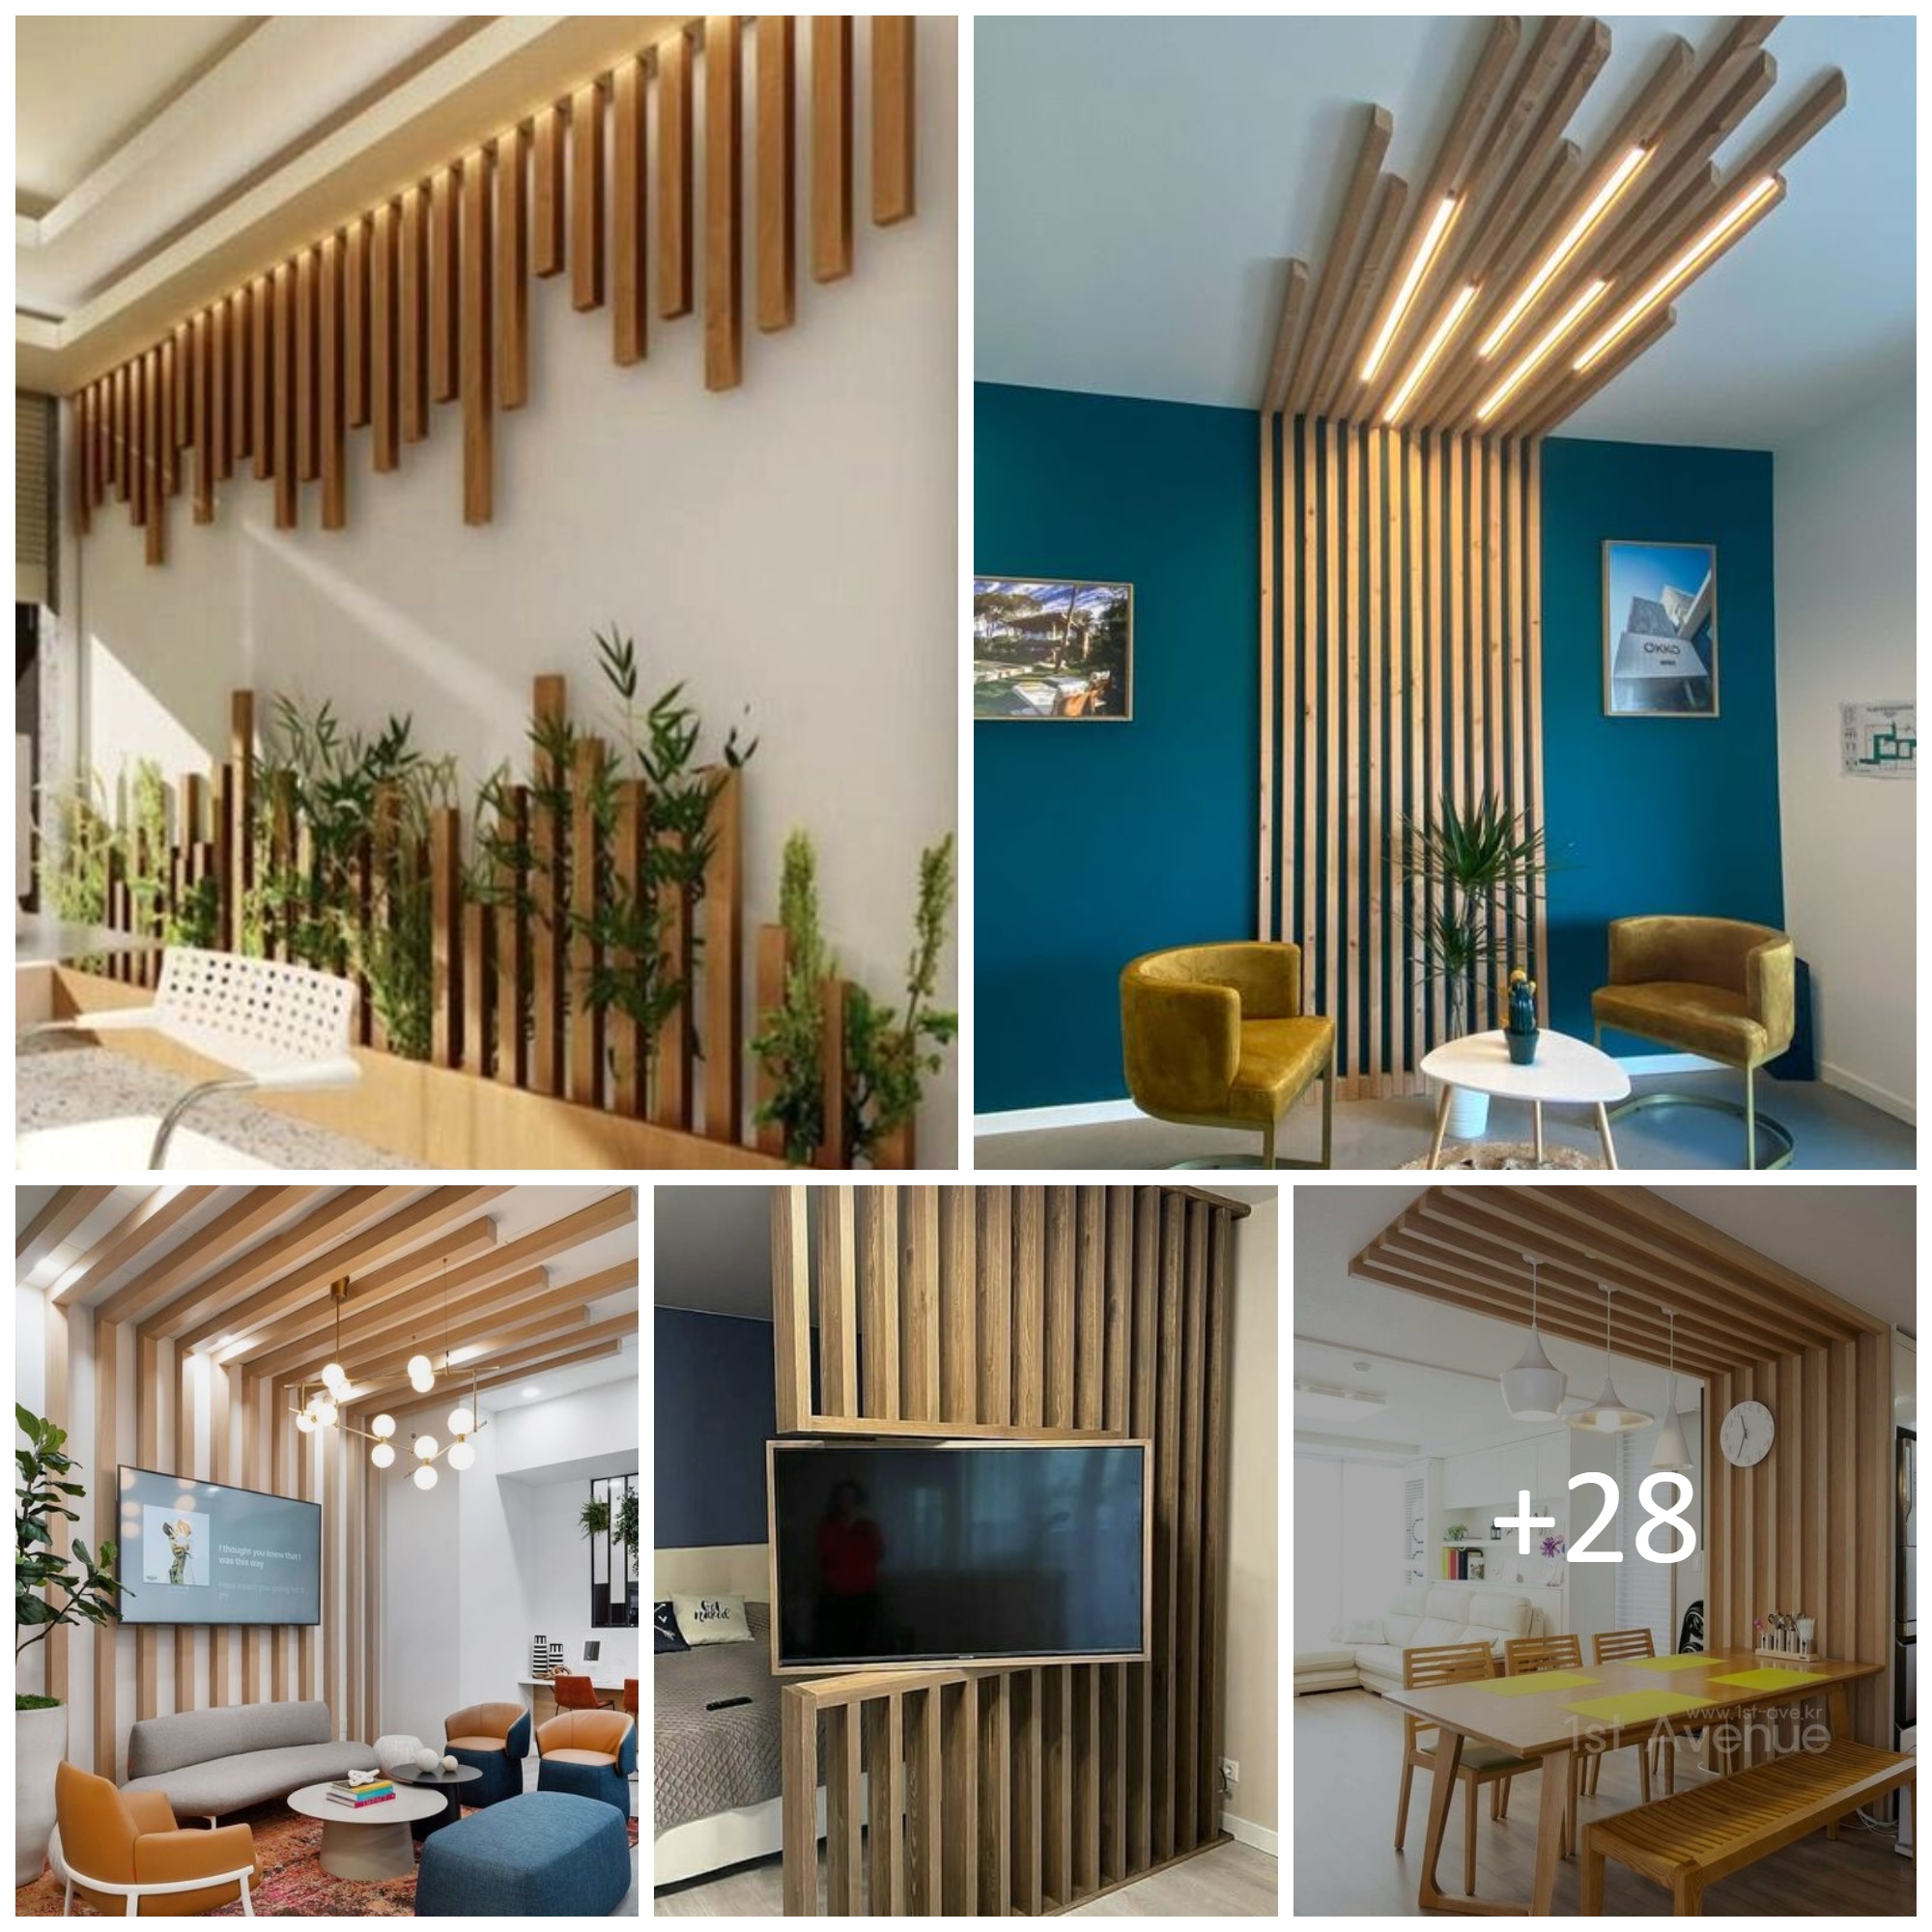 Wood Slat Accent Walls: Trendy and Timeless